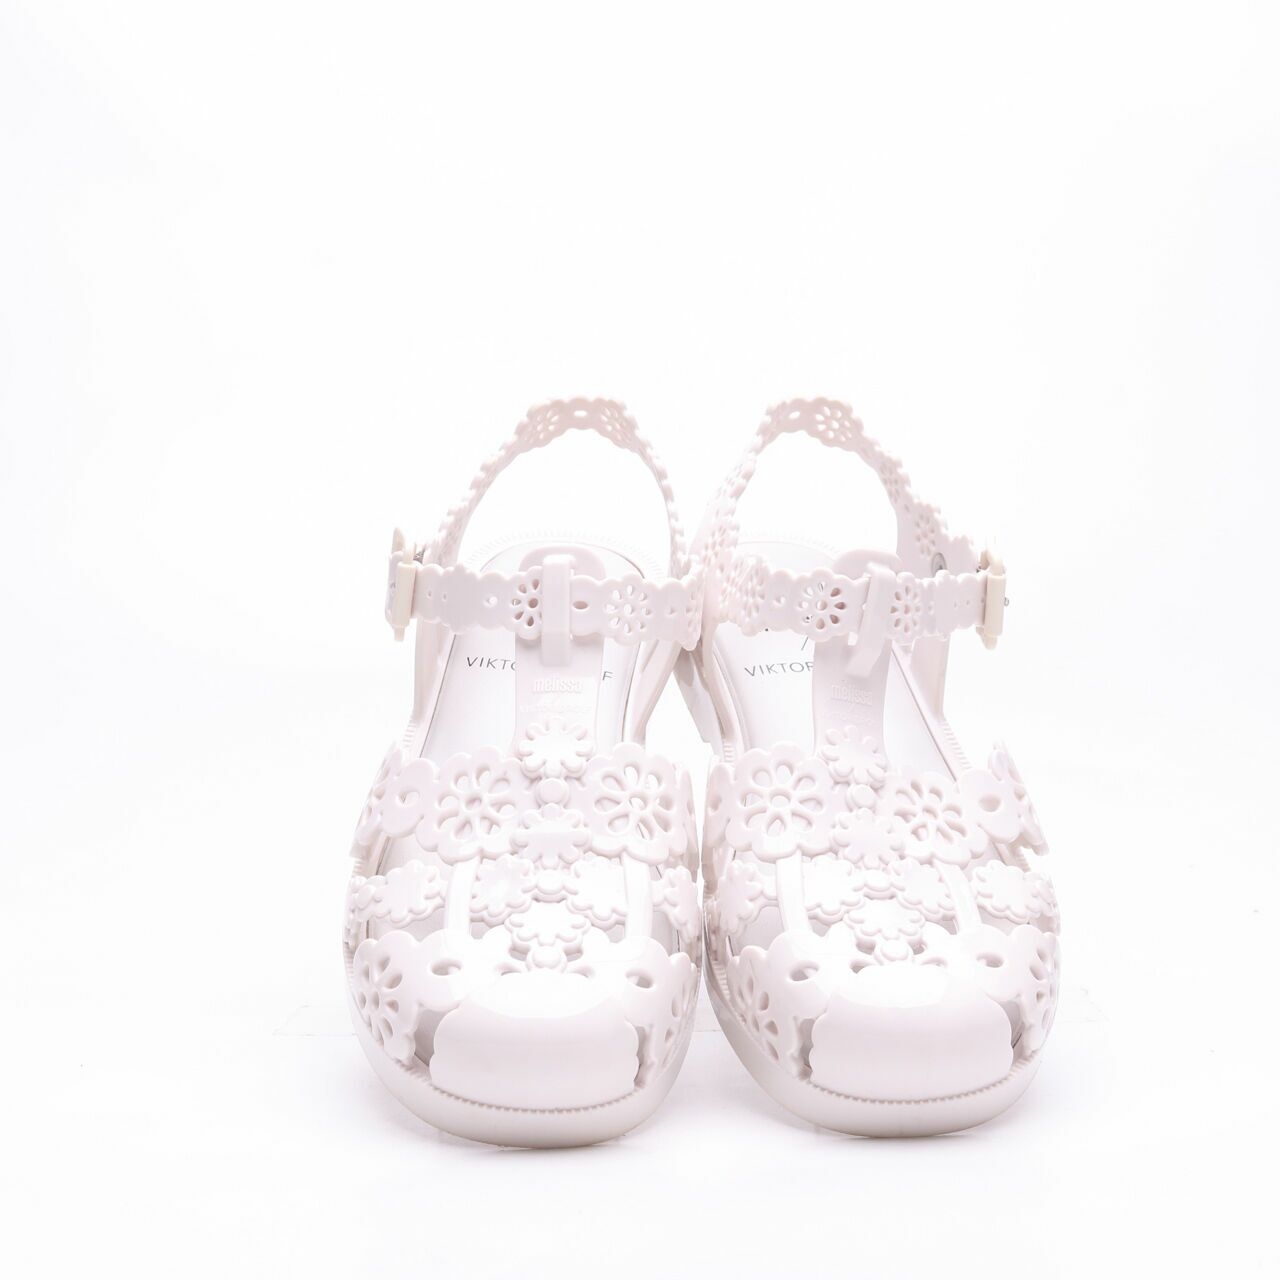 Mellisa x Victor & Rolf Possession Lace White Flats Shoes